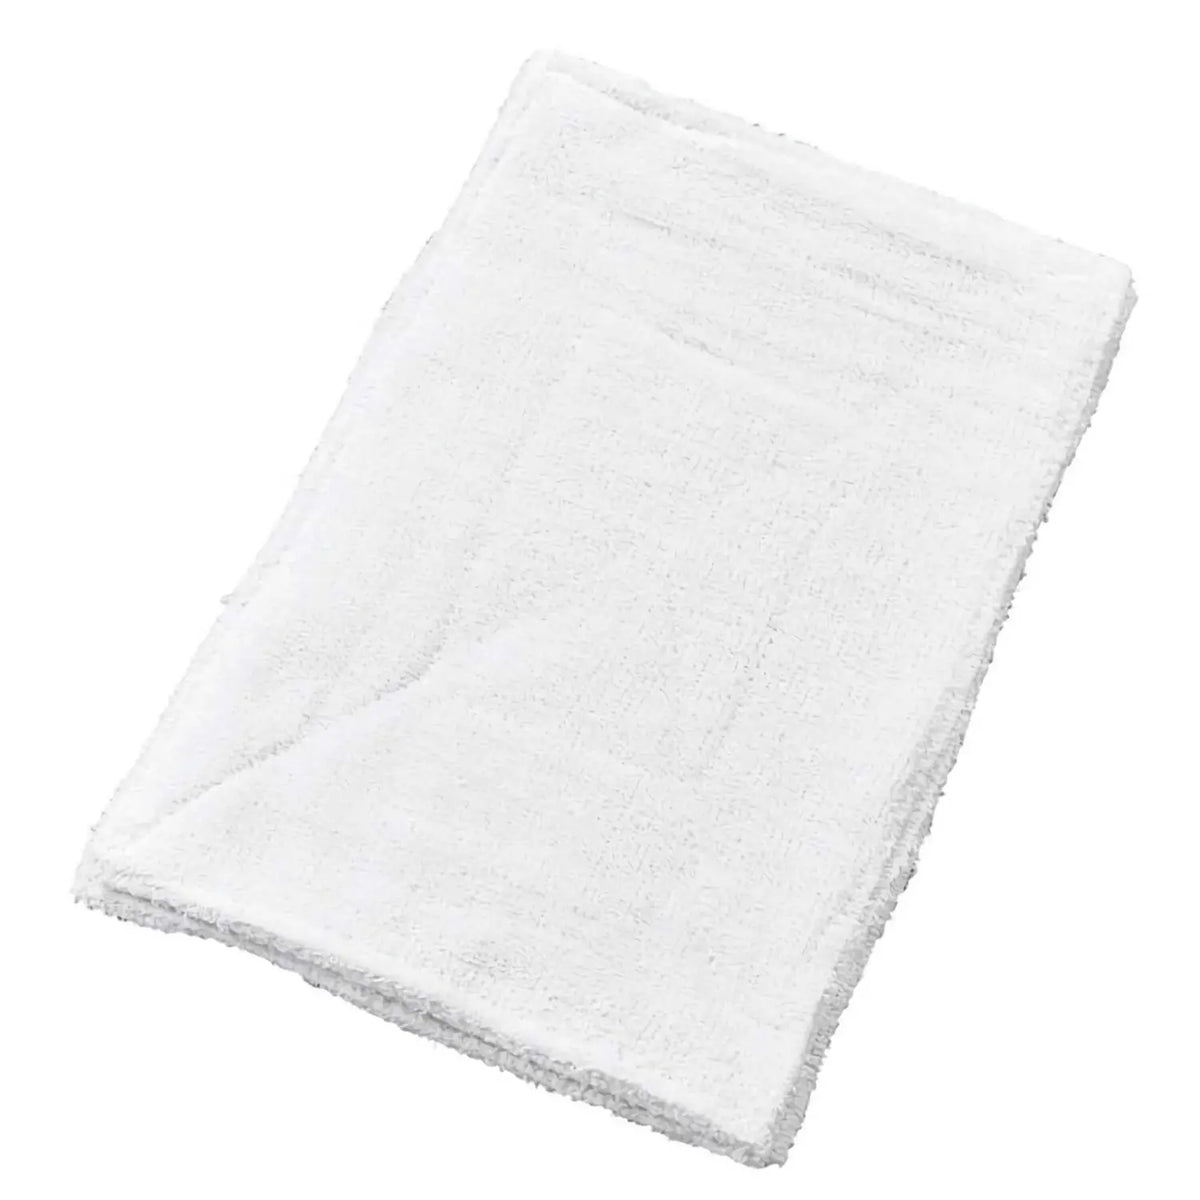 SATO TRADING Cotton Cleaning Cloth 300x200 mm 10 pcs